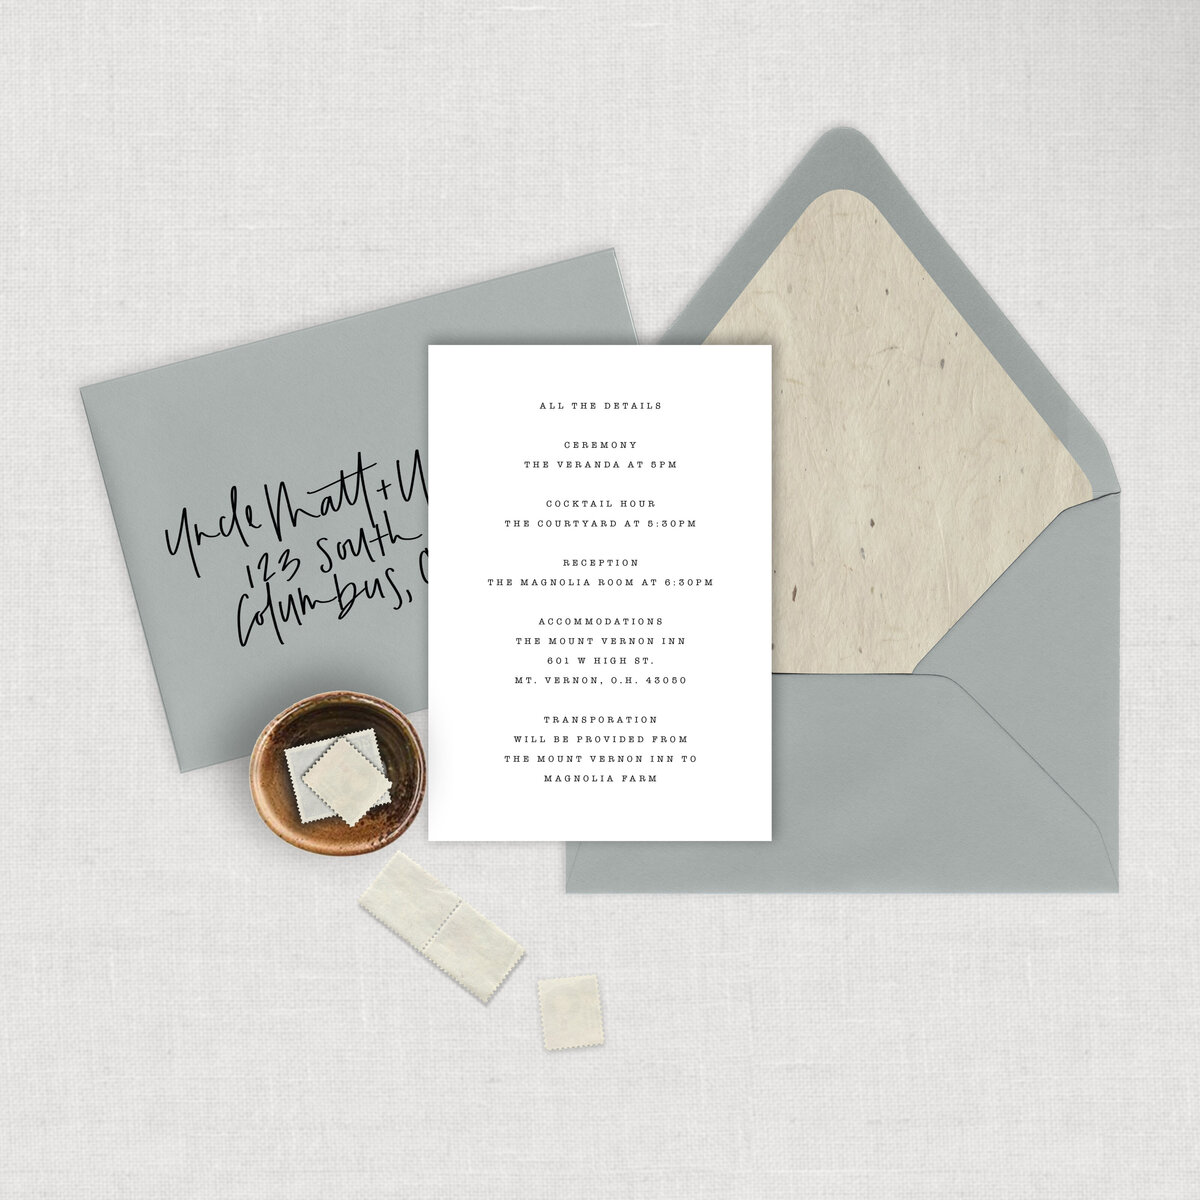 Typewriter wedding invitation suite is a simple wedding invitation detail card with calligraphy mailing envelope and a Japanese textured envelope liner.